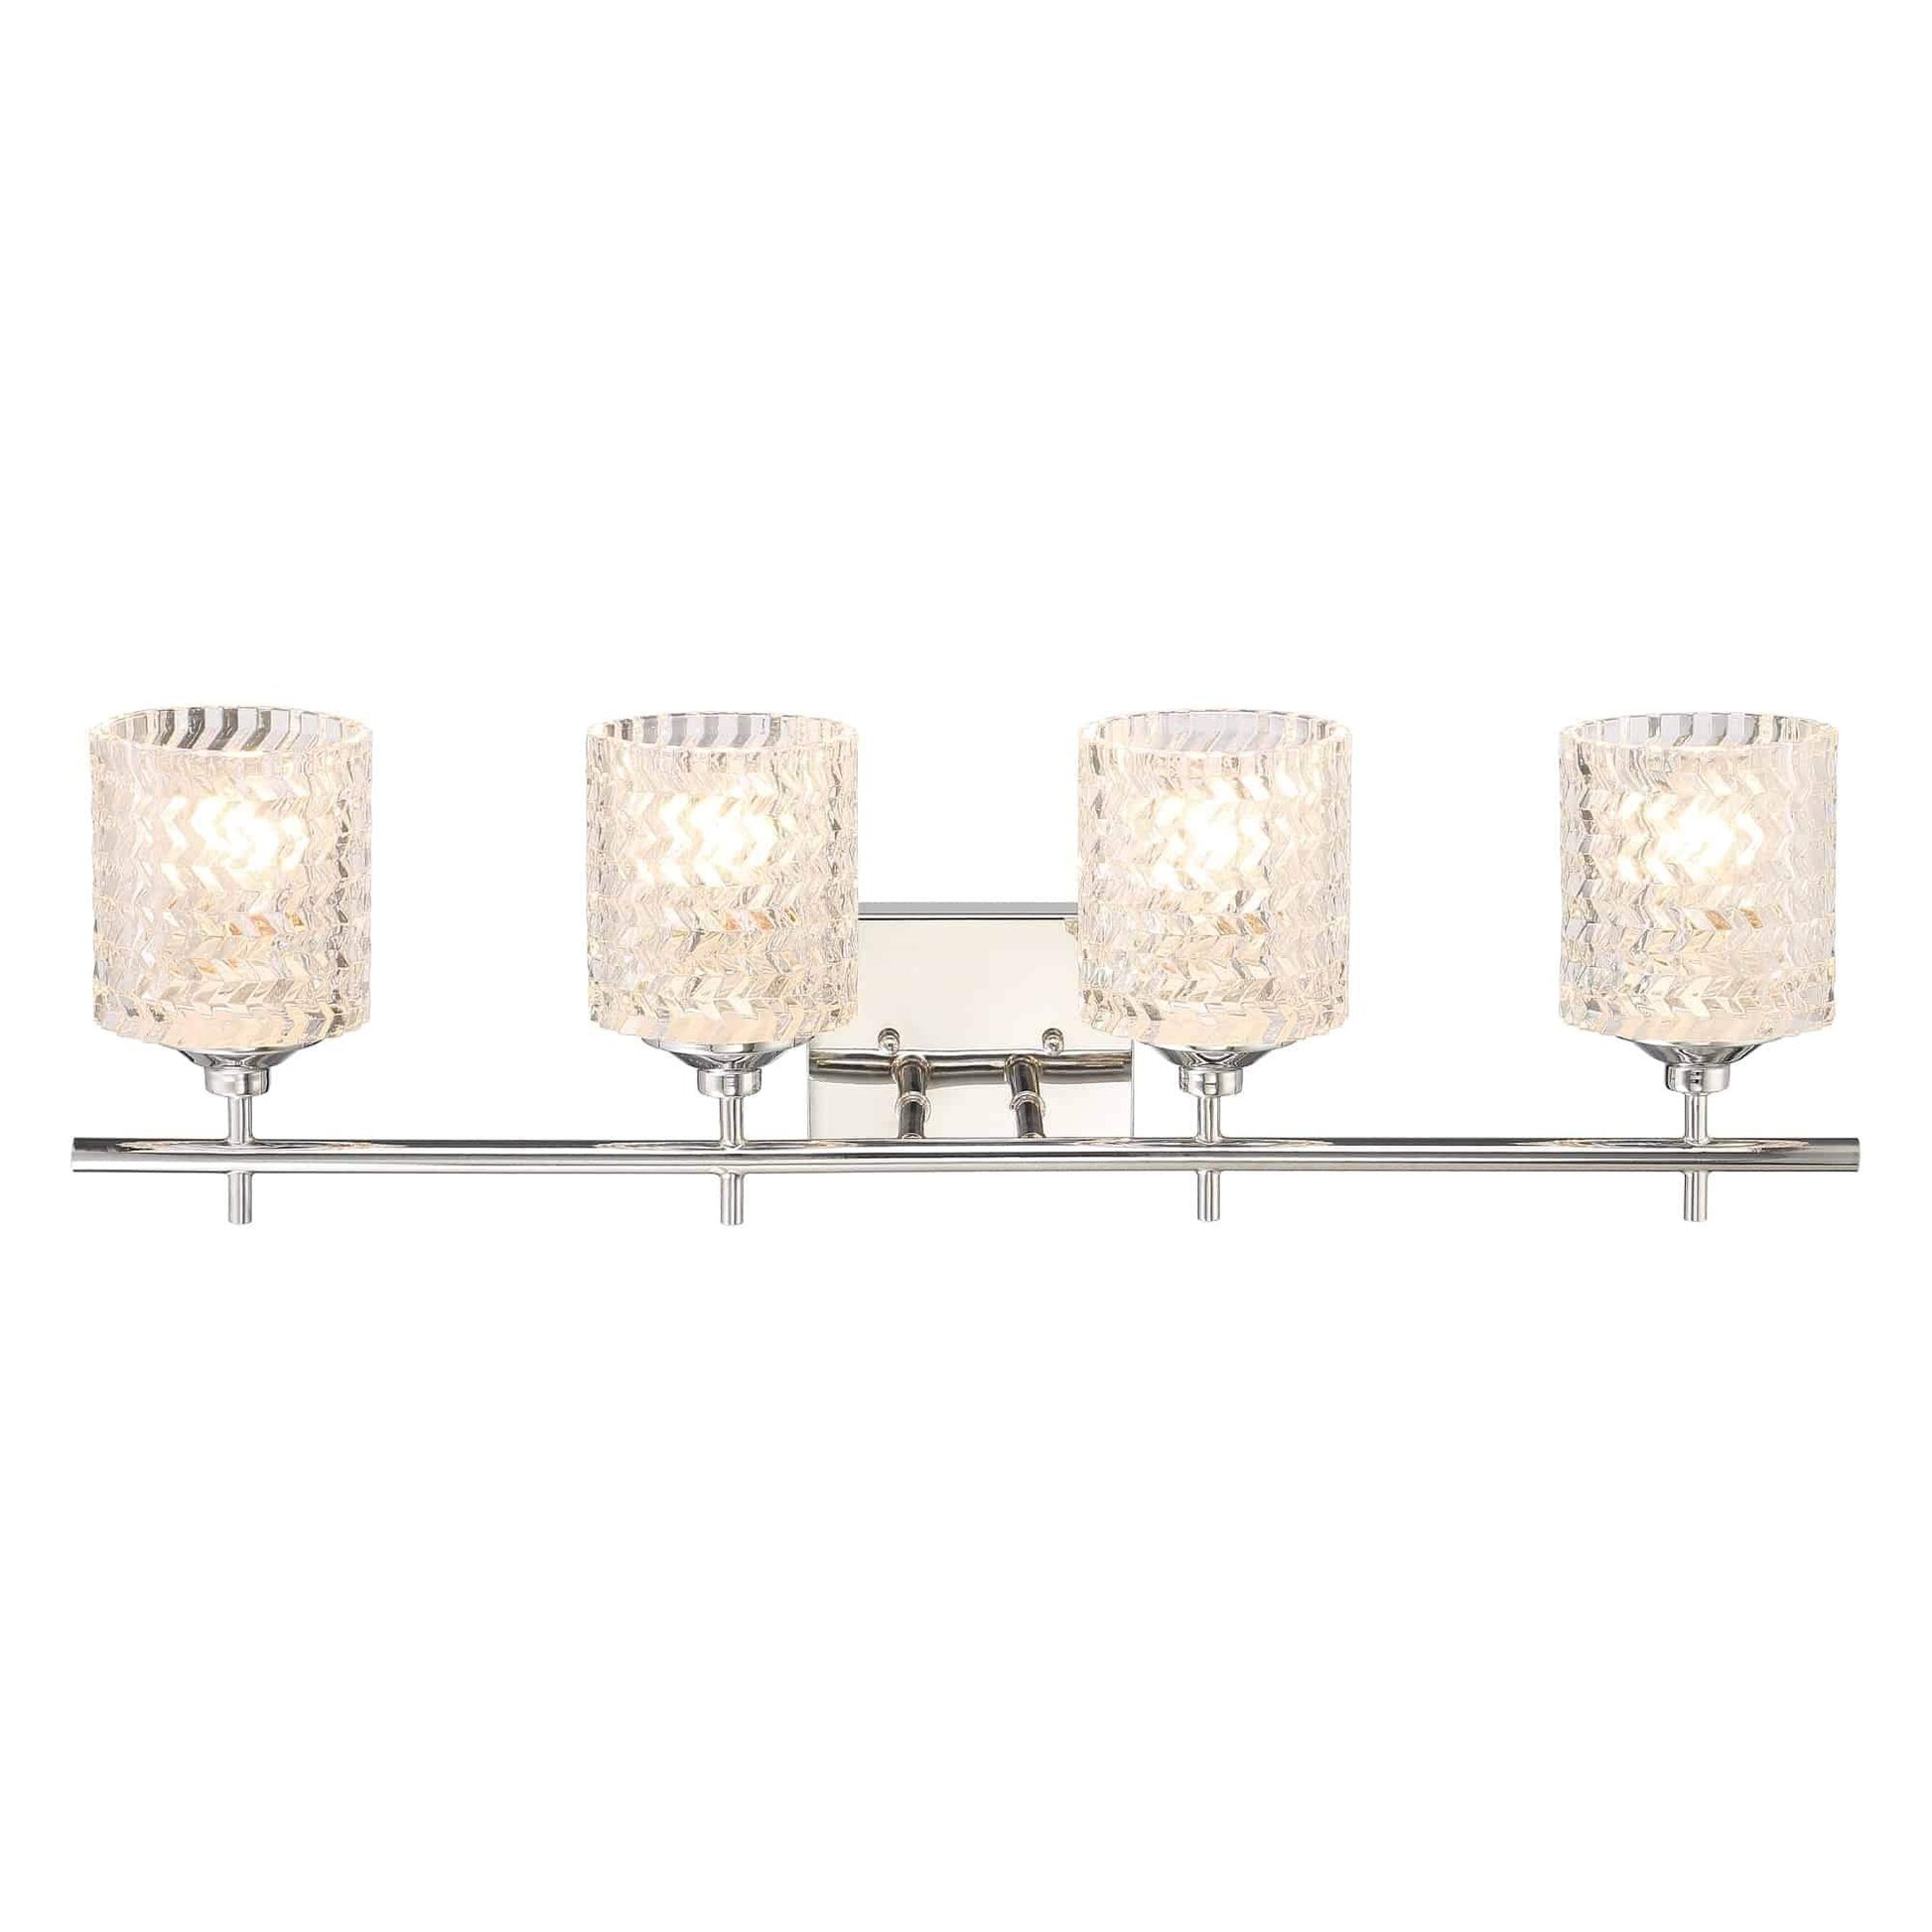 4 light unique glass vanity light (18) by ACROMA